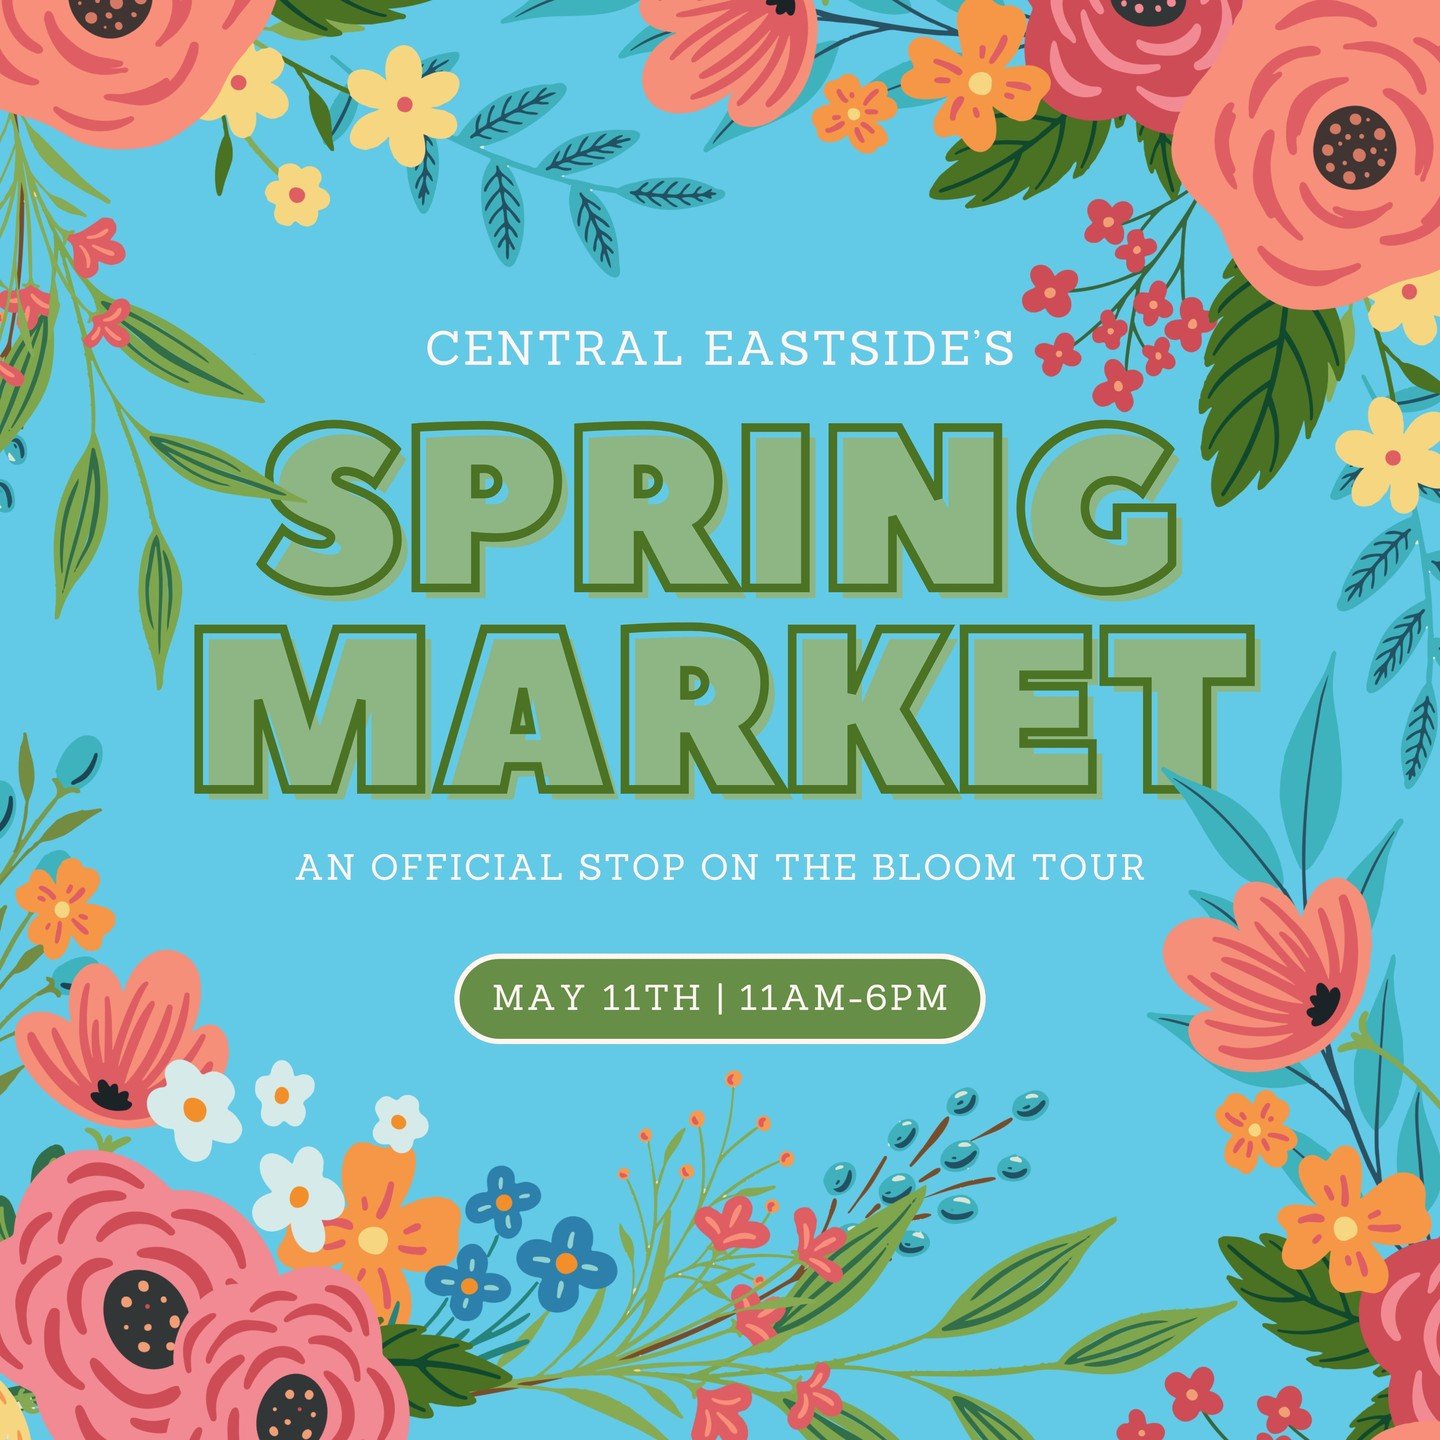 🌸 Join us at the Spring Market 🌸

May 11th, 11 am - 6 pm
Water Ave Showroom, 1010 Water Avenue, Suite 105

Get ready to explore the vibrant energy of the Central Eastside as it joins this year's Bloom Tour, expanding beyond downtown Portland and Ol